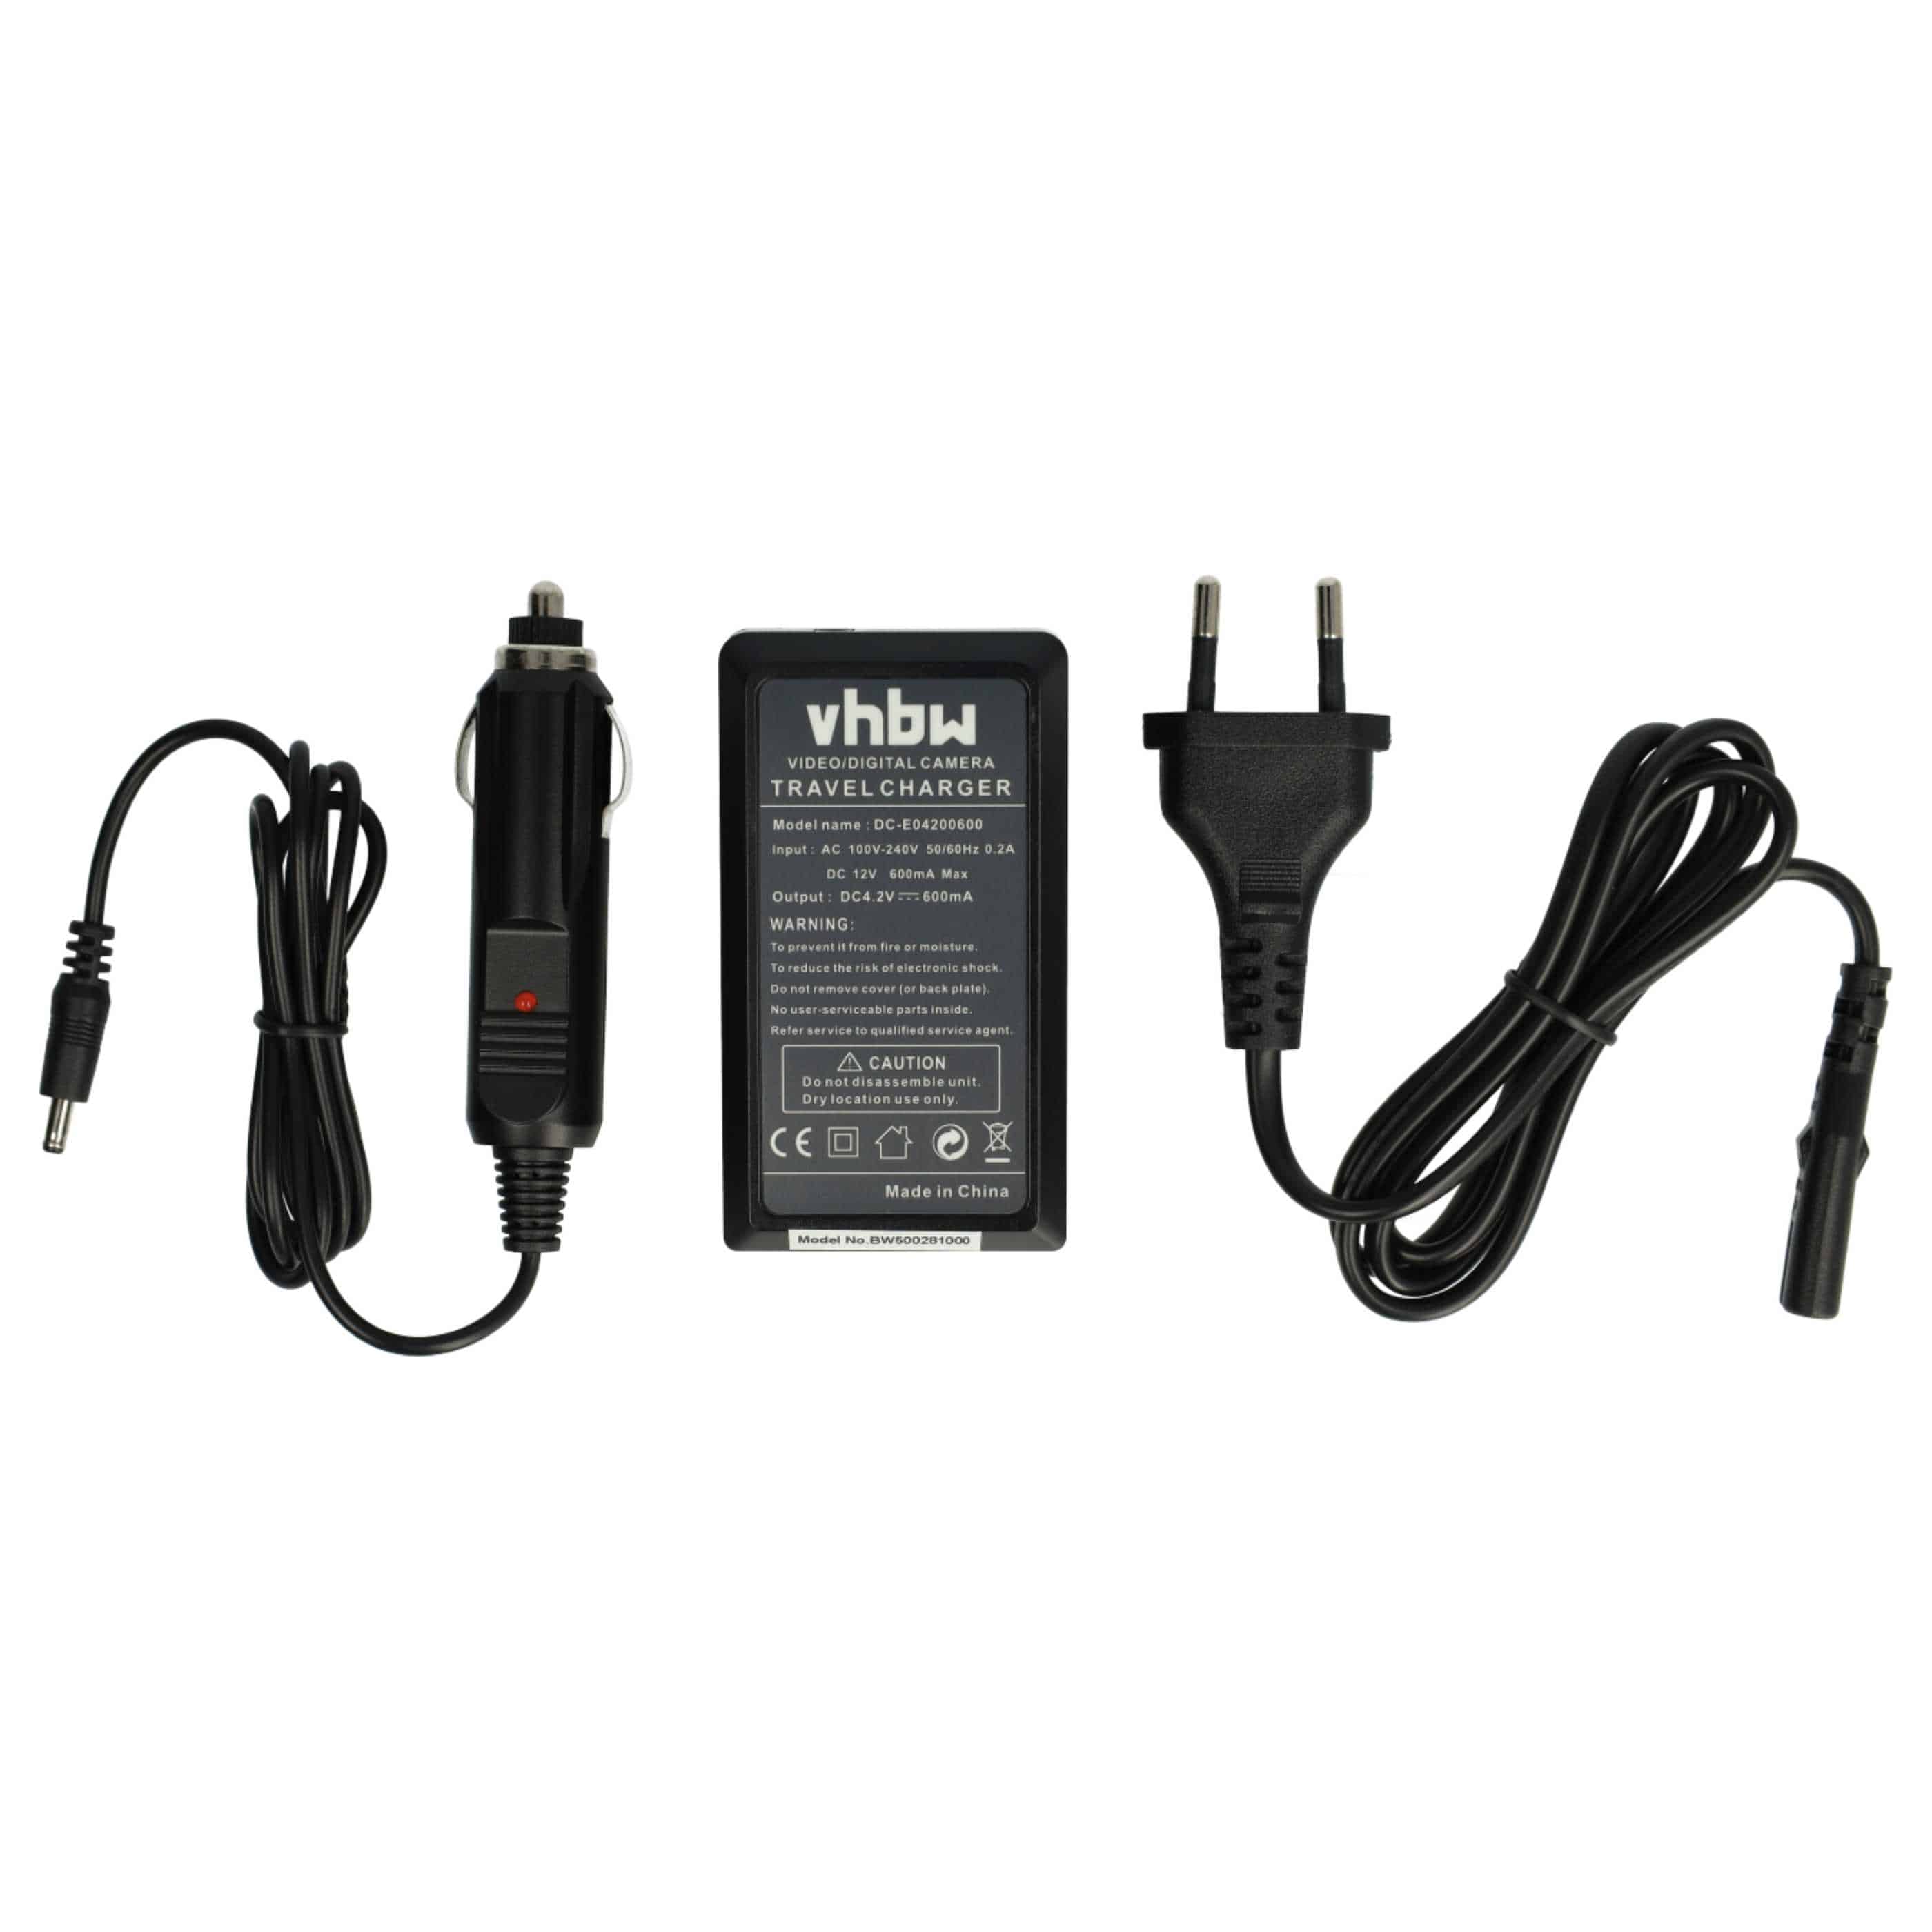 Battery Charger suitable for SDR-S26 Camera etc. - 0.6 A, 4.2 V